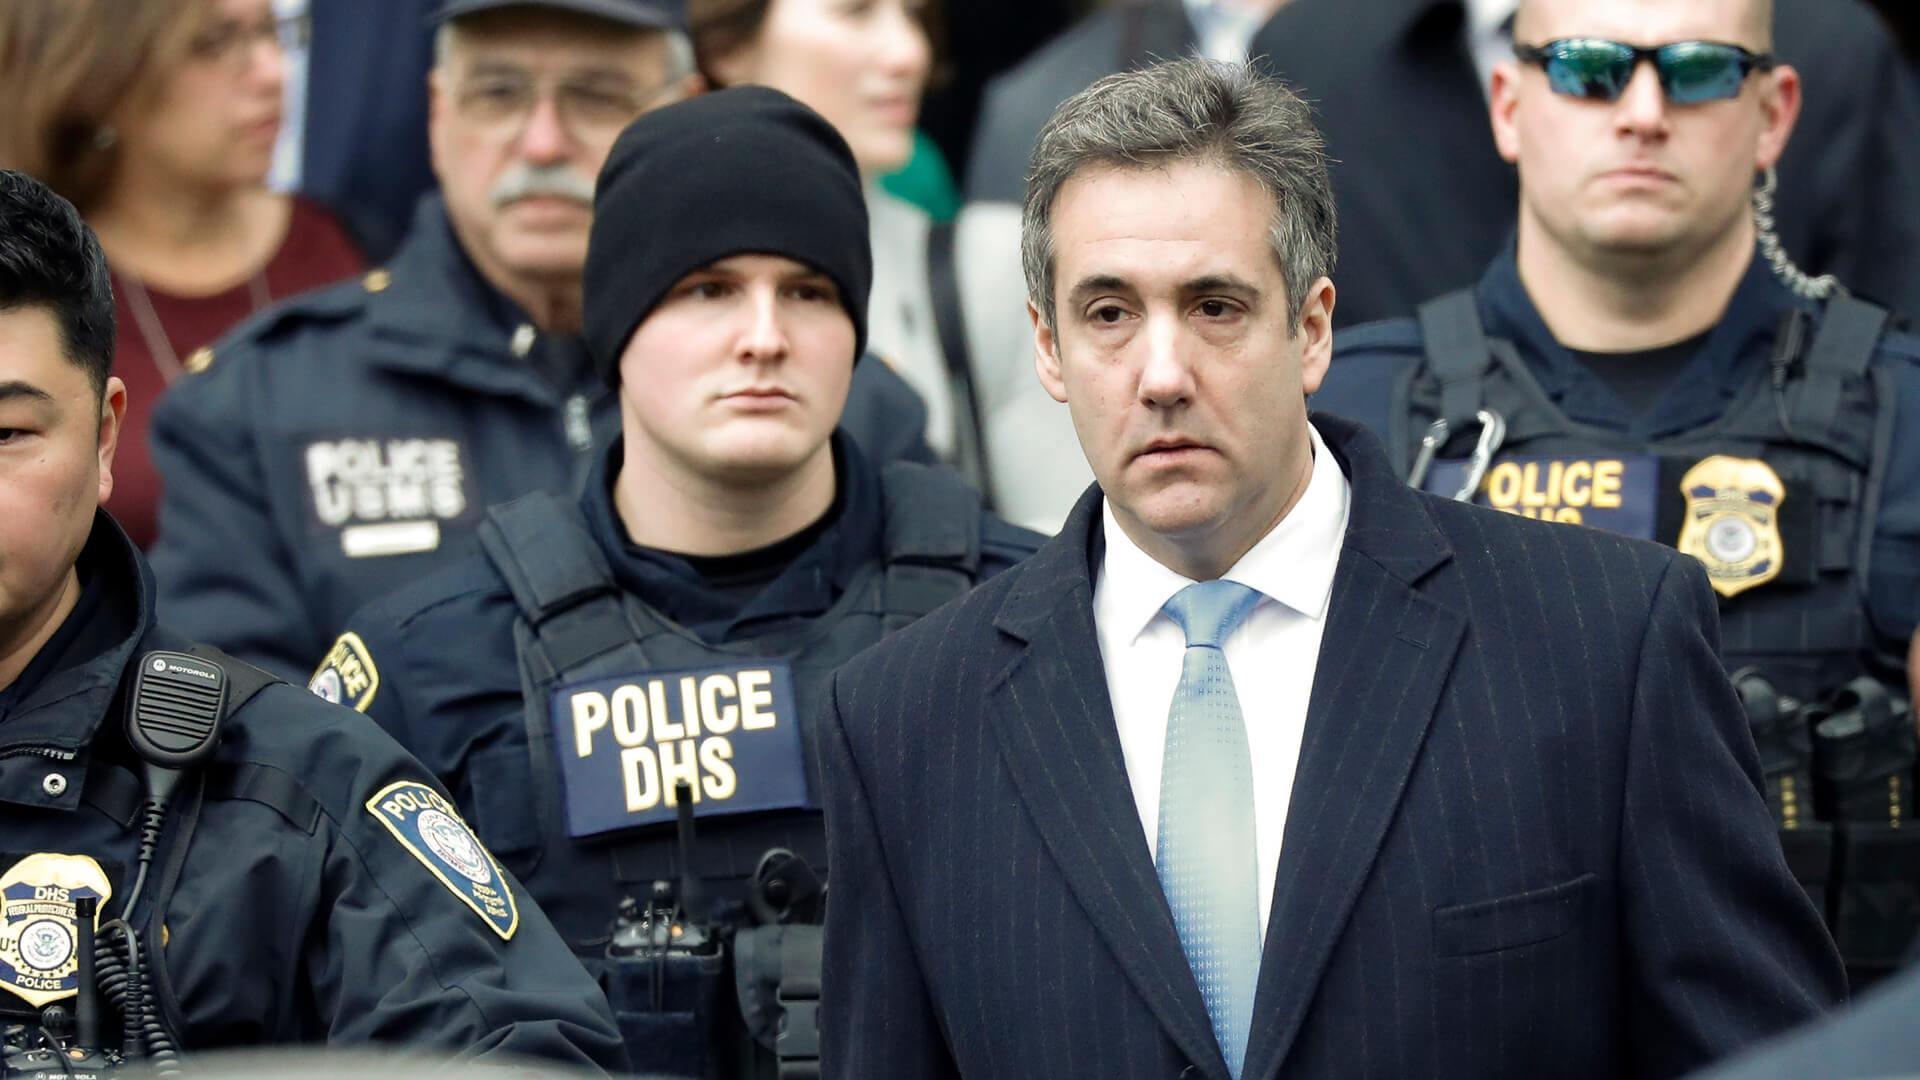 Mandatory Credit: Photo by JASON SZENES/EPA-EFE/REX/Shutterstock (10031563f)Michael Cohen (front -R), President Trump's former lawyer, departs United States Federal Court after being sentenced to three years in prison in New York, New York, USA, 12 December 2018.